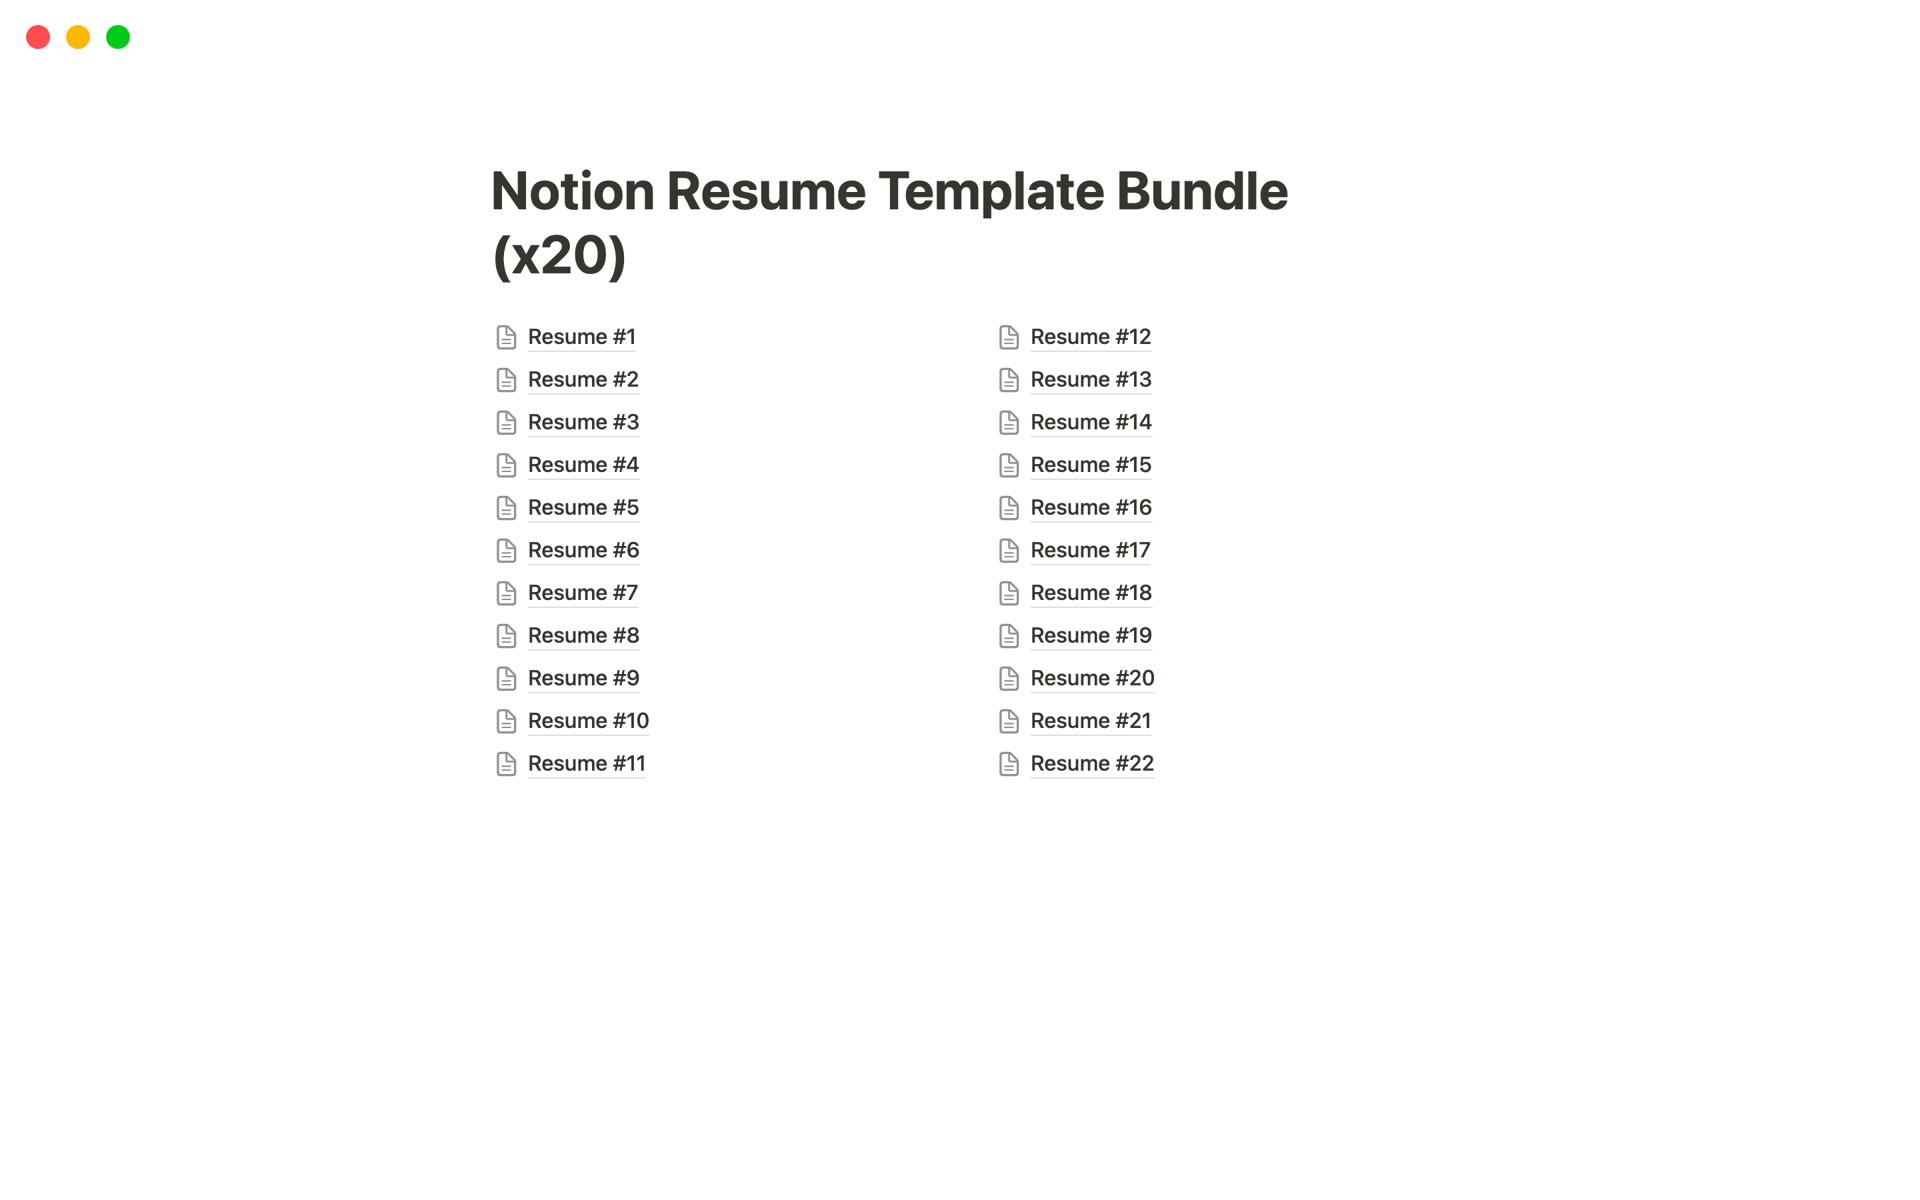 A Set of +20 notion resume templates suits a variety of industries and career levels
